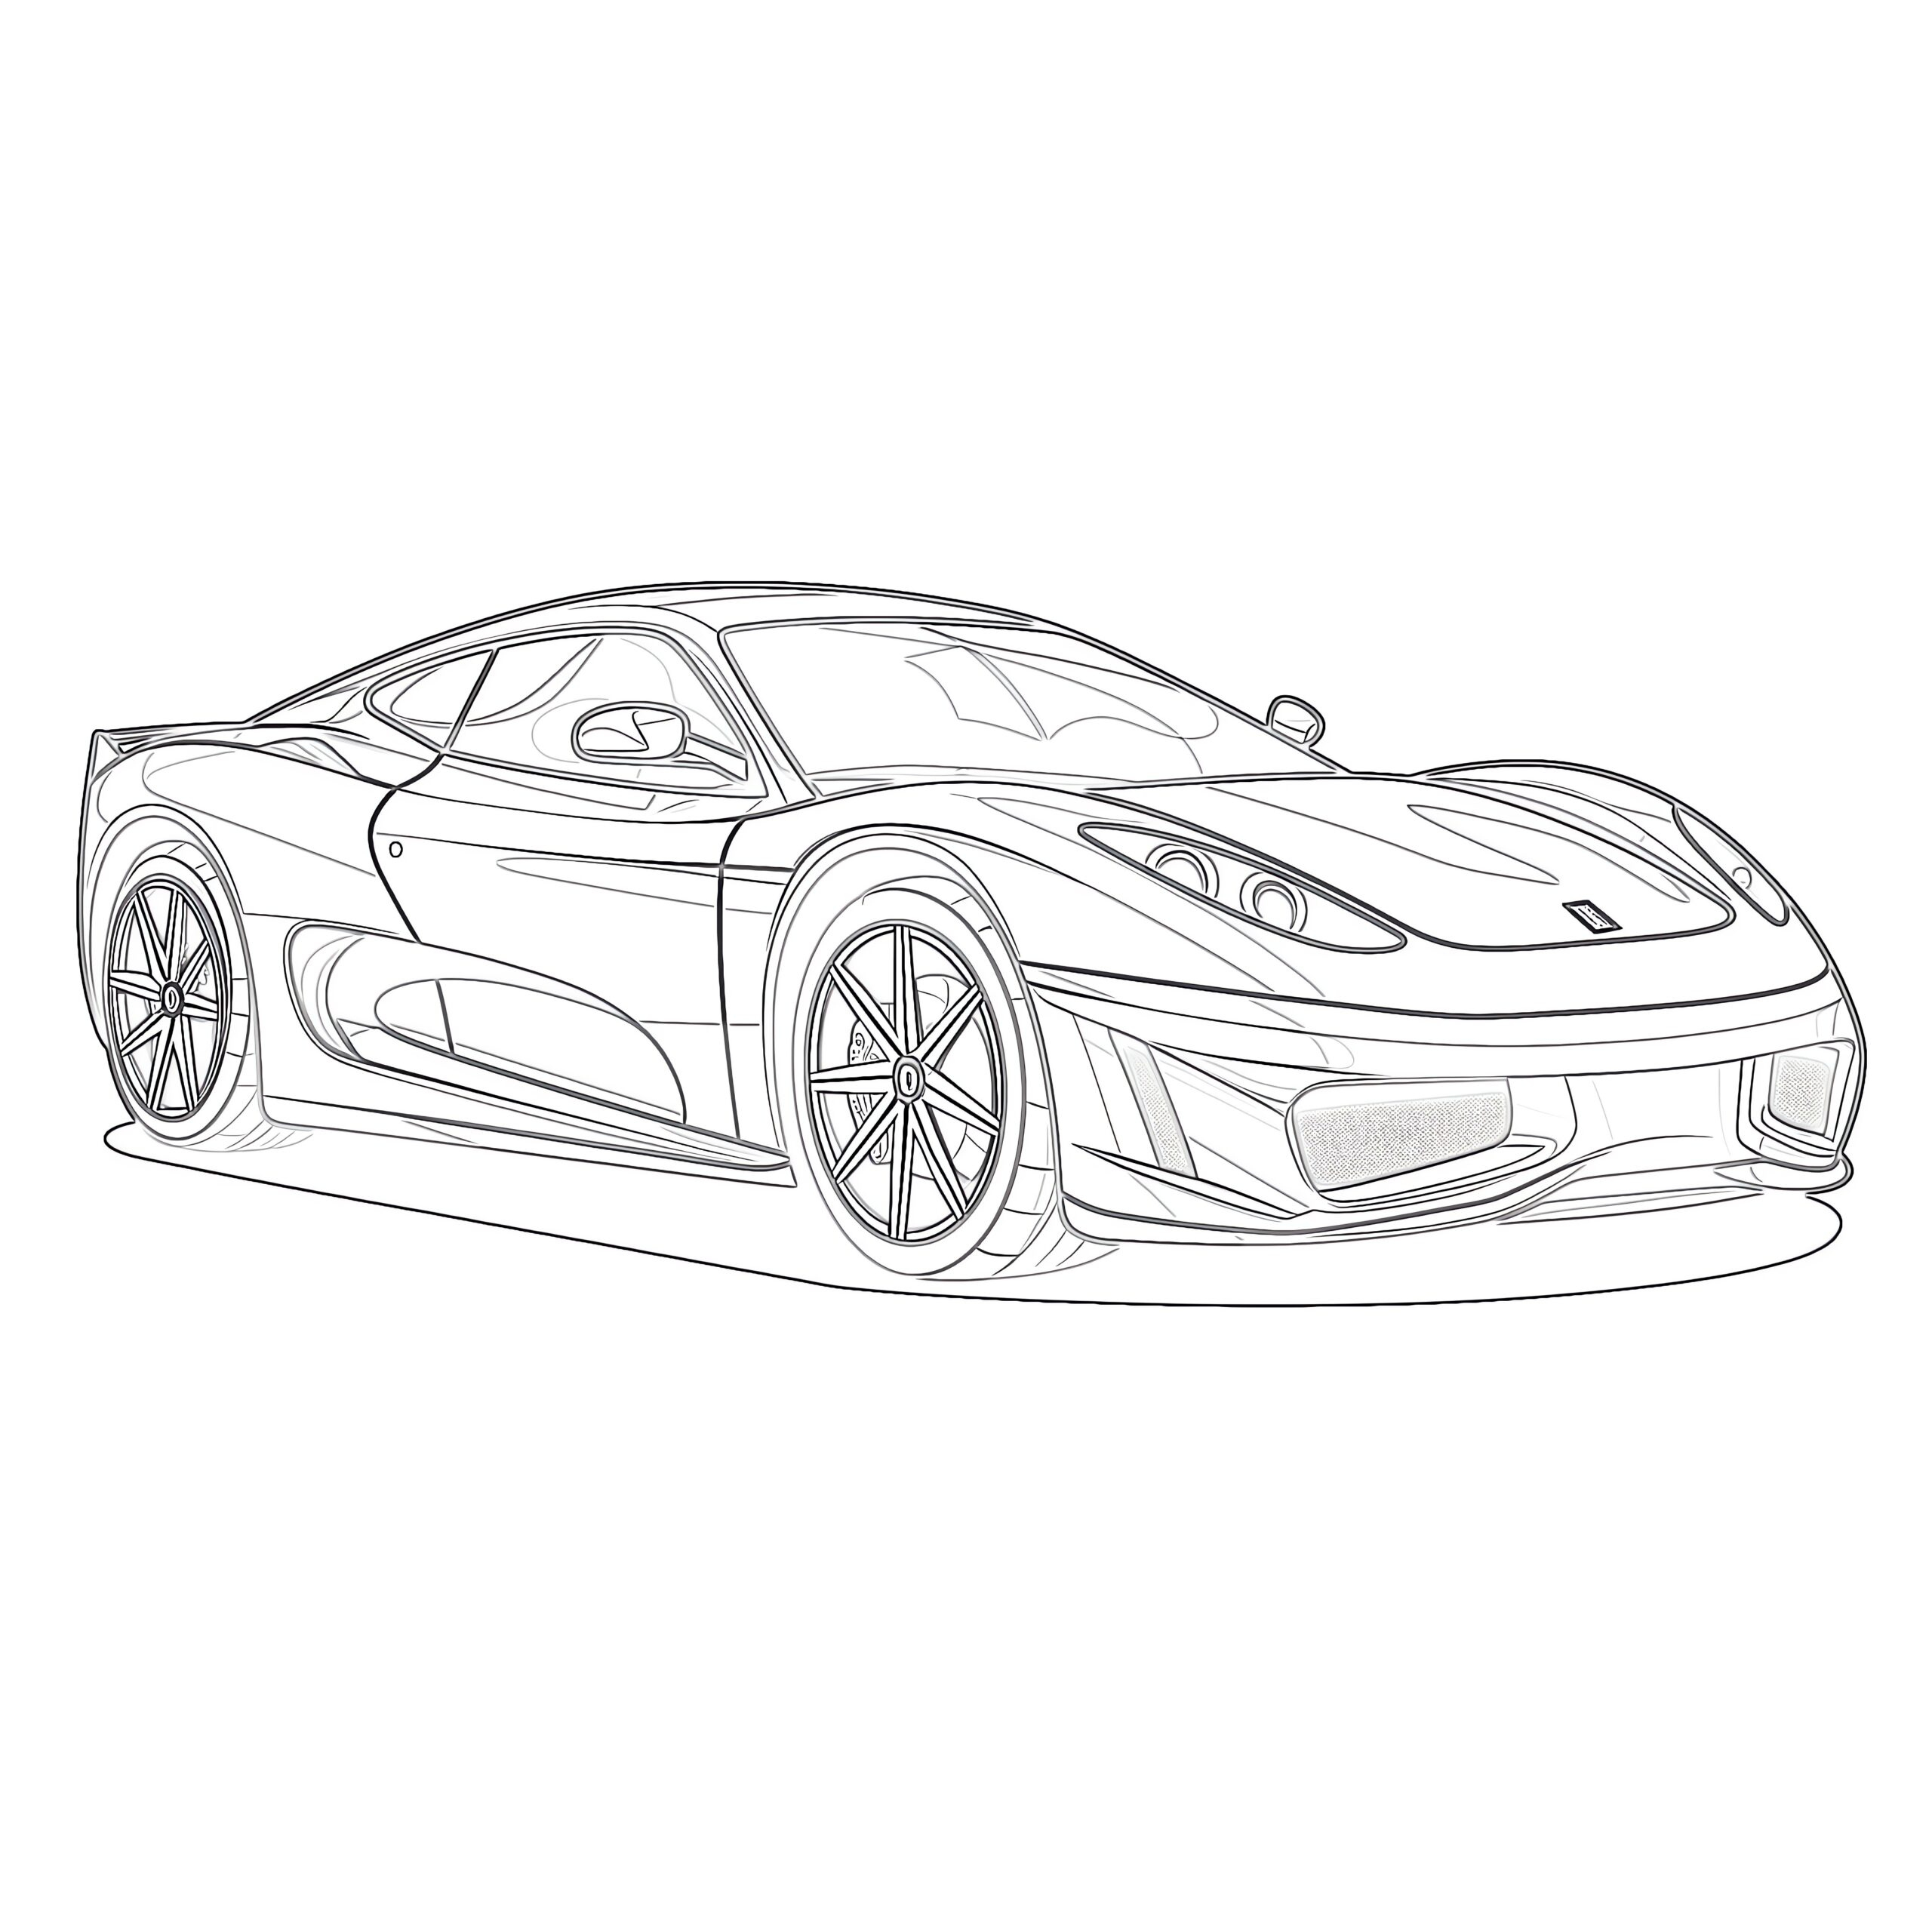 Printable Sports Car Coloring Page - Mimi Panda for Cars Colouring Pages Printable Free